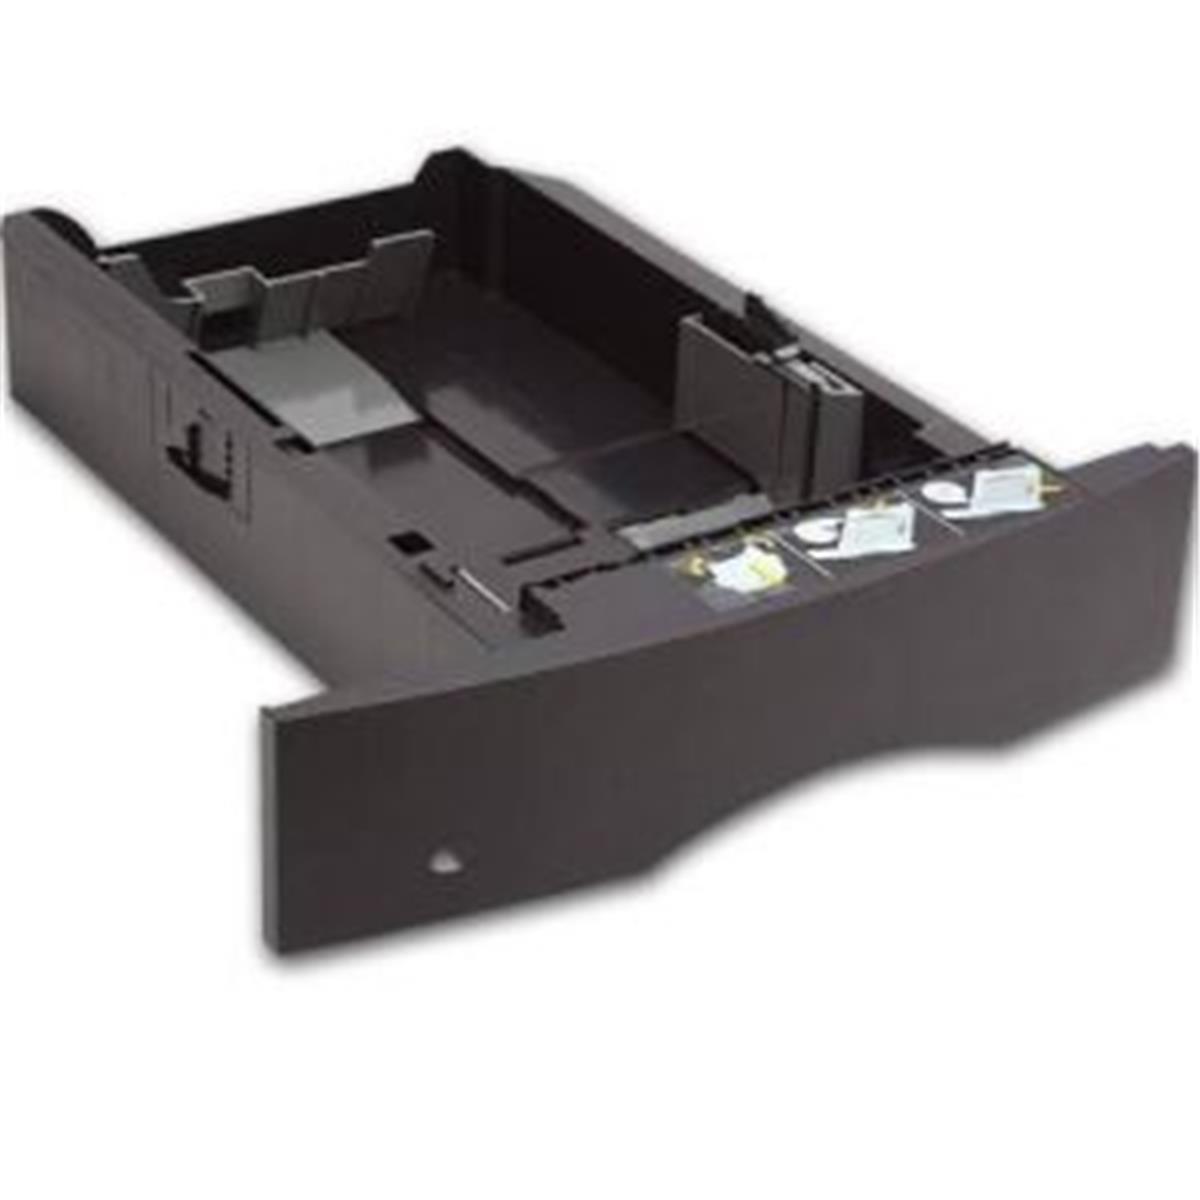 CF235-67917-OEM M725 Paper Input Tray - Use for Tray 4, 5 & 6 -  HP